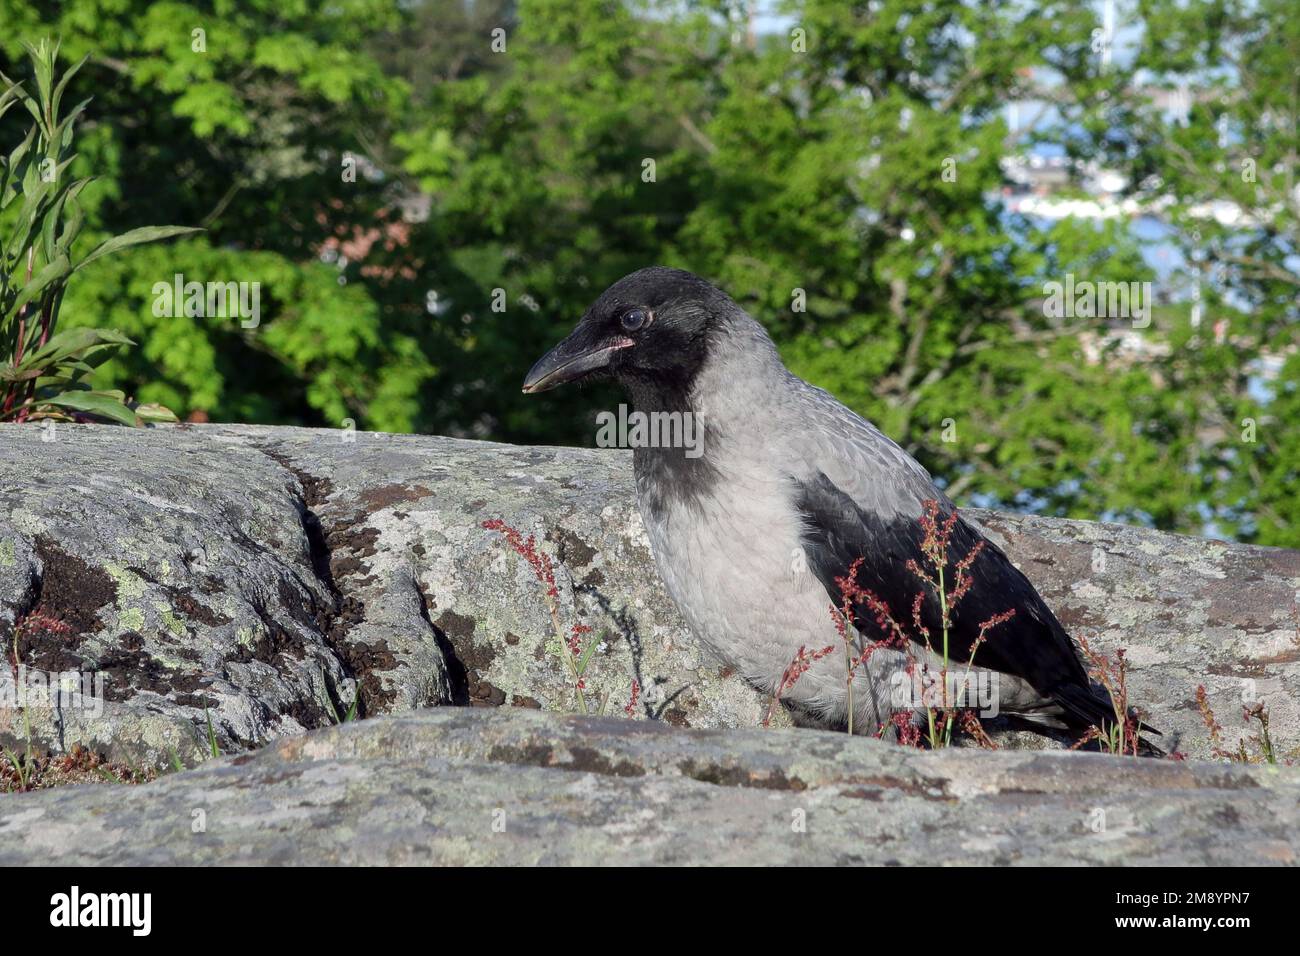 Juvenile Hooded Crow, Corvus cornix, exploring environment outside the safety of his nest in early summer. Stock Photo